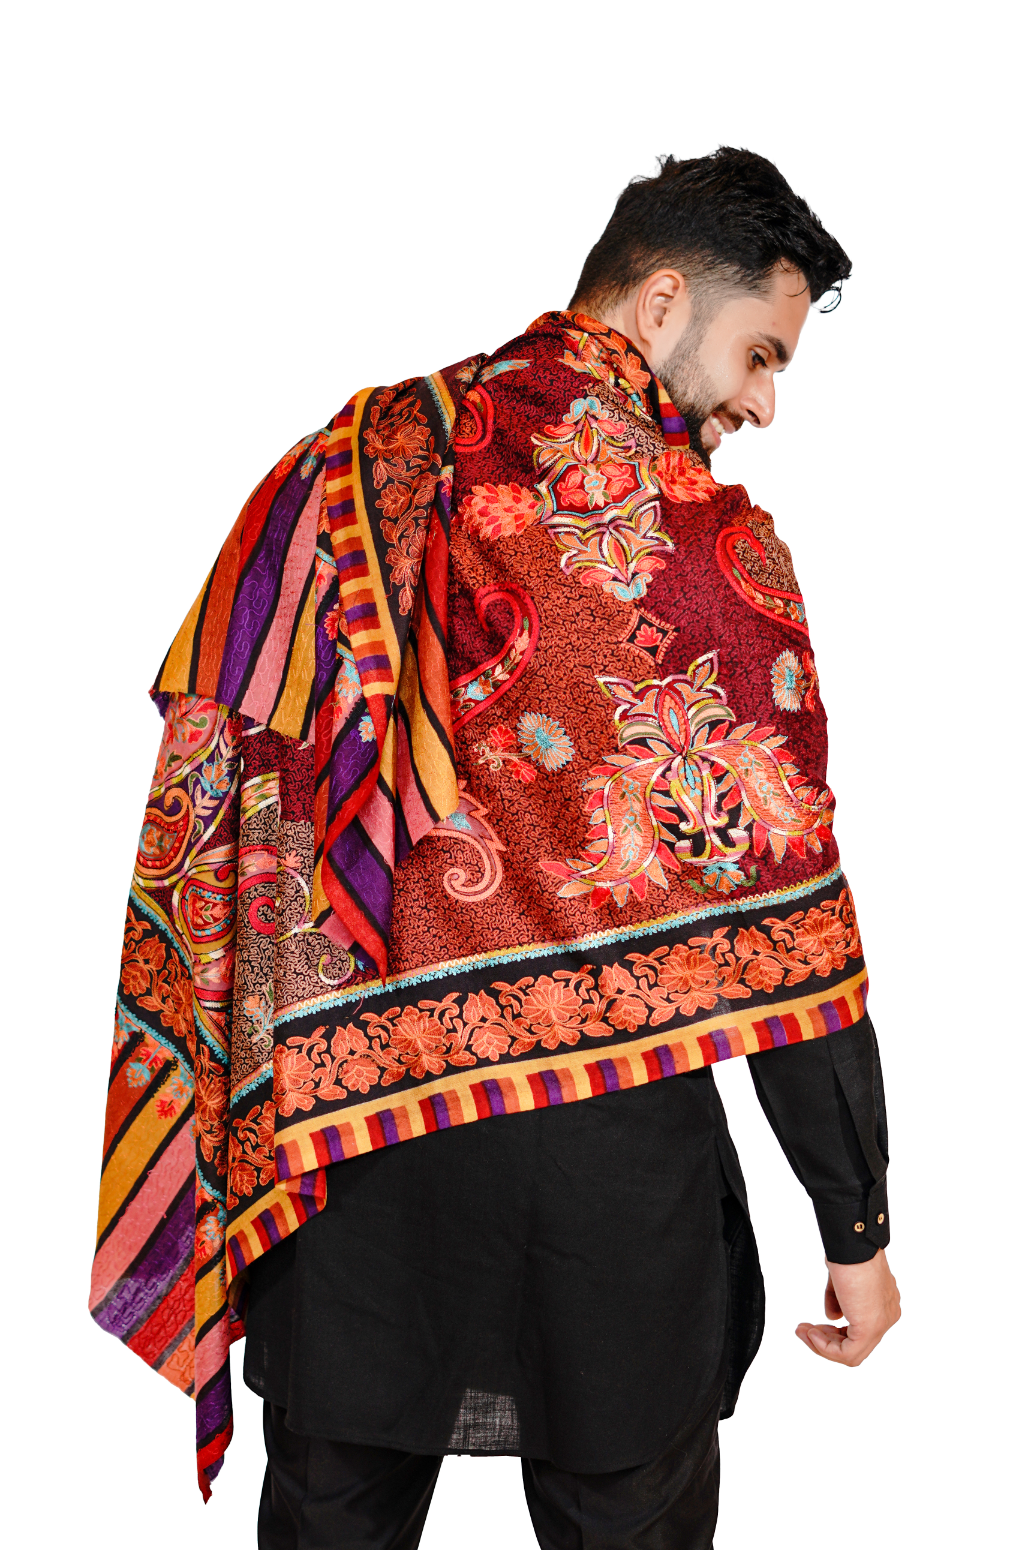 Men's Wool Shawl with Exquisite Aari Embroidery - Scarlet Red